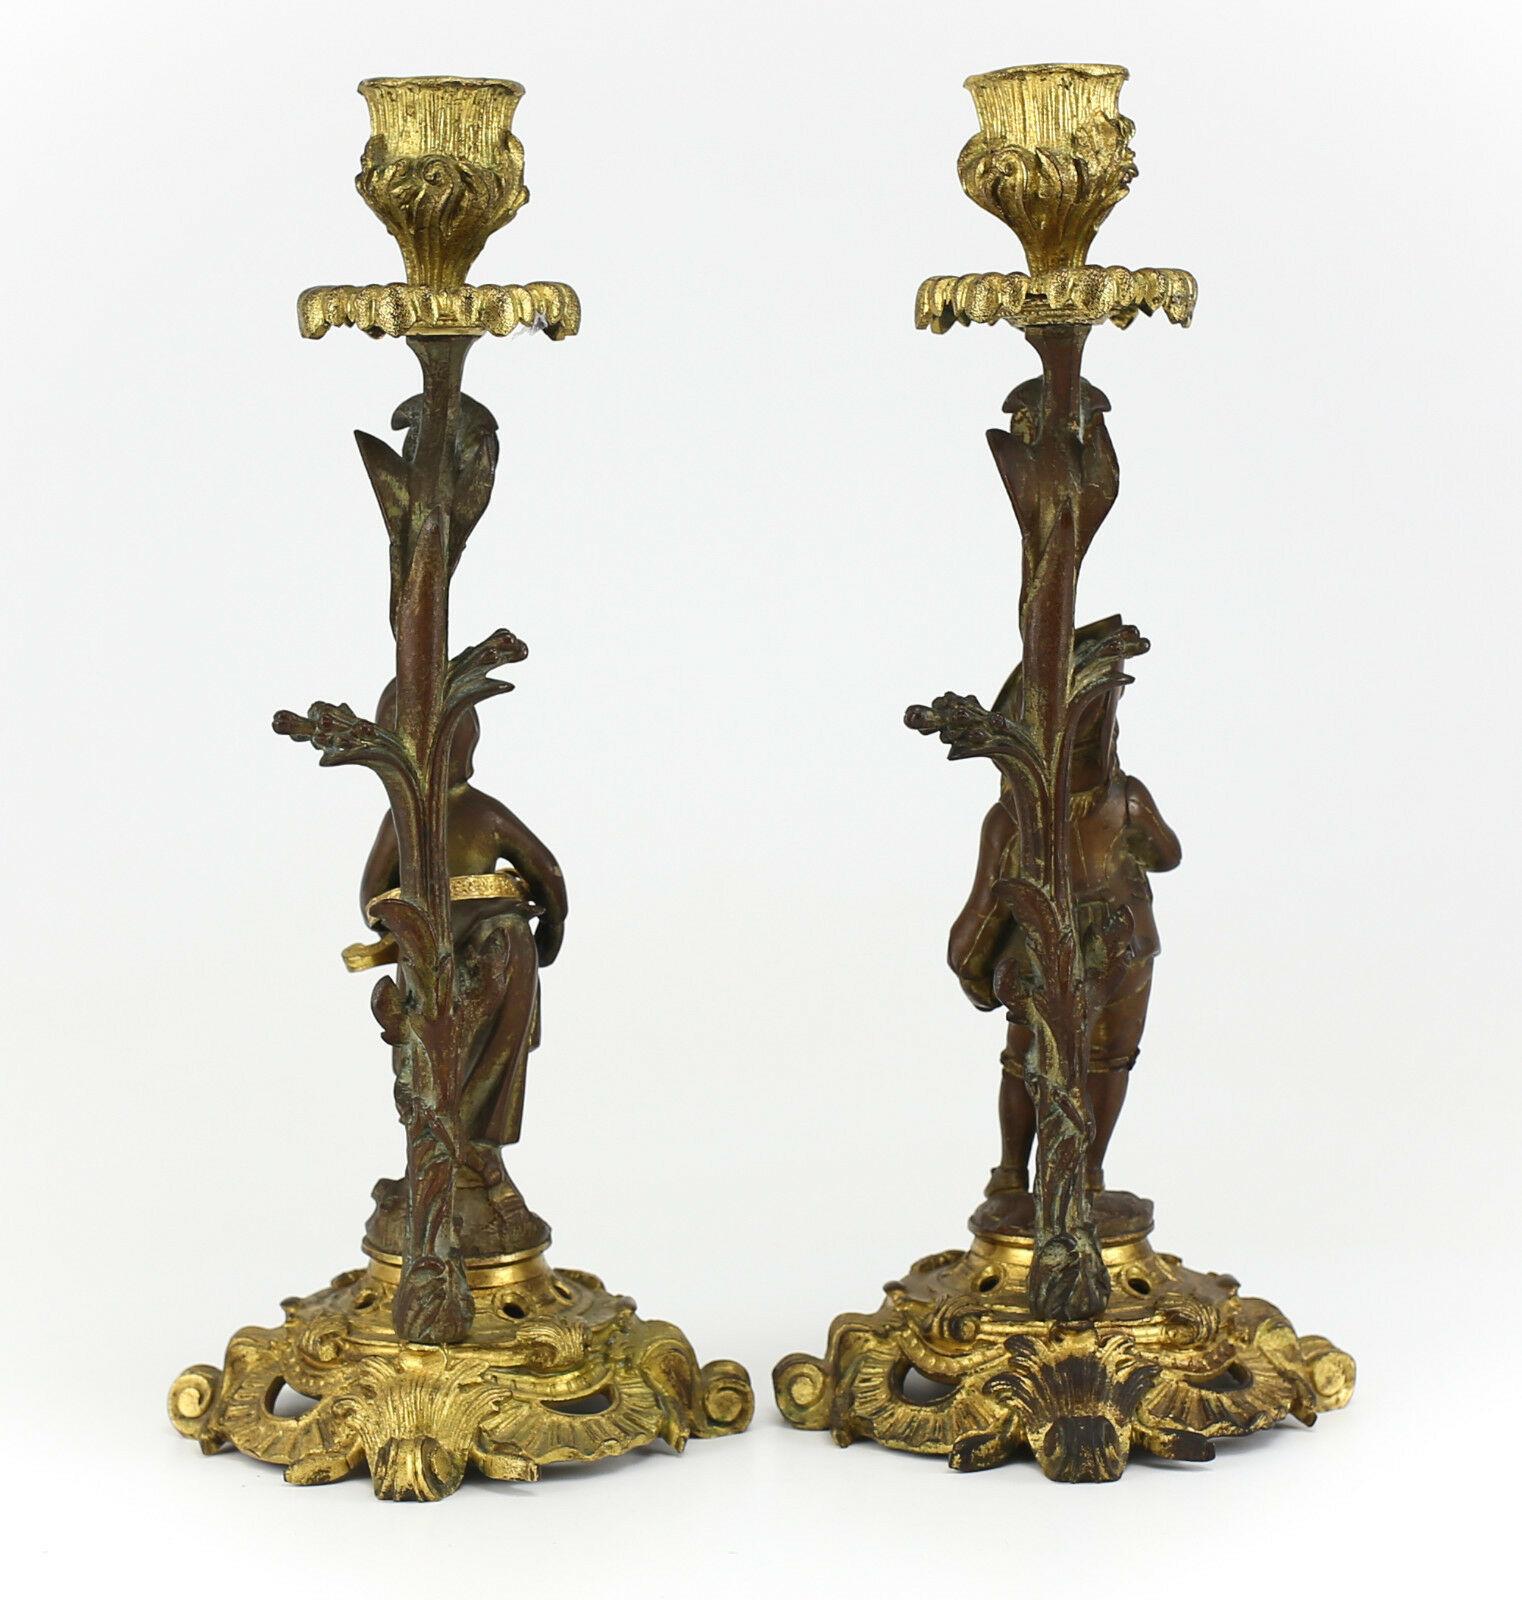 Pair of French gilt bronze candlesticks, Male & Female Musicians, 19th century 

Charming Male & Female Musician Figures w/ Flute & Mandolin Respectively attired in Colonial style Dress. Foliate scrolls compasses the base of both bases. Appearance